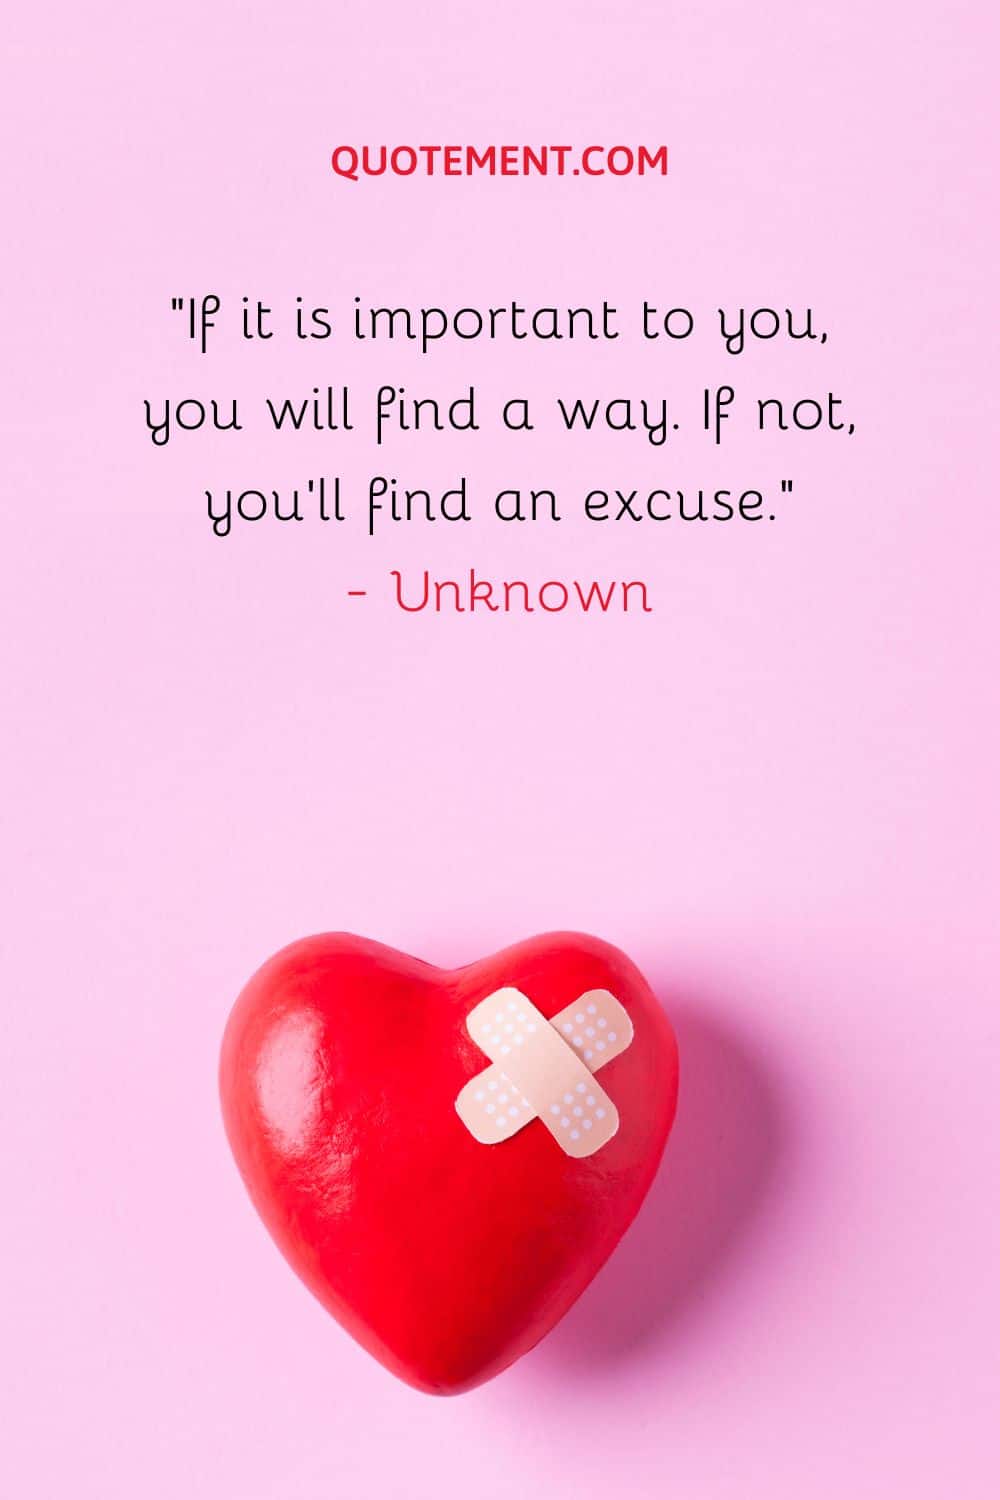 If it is important to you, you will find a way